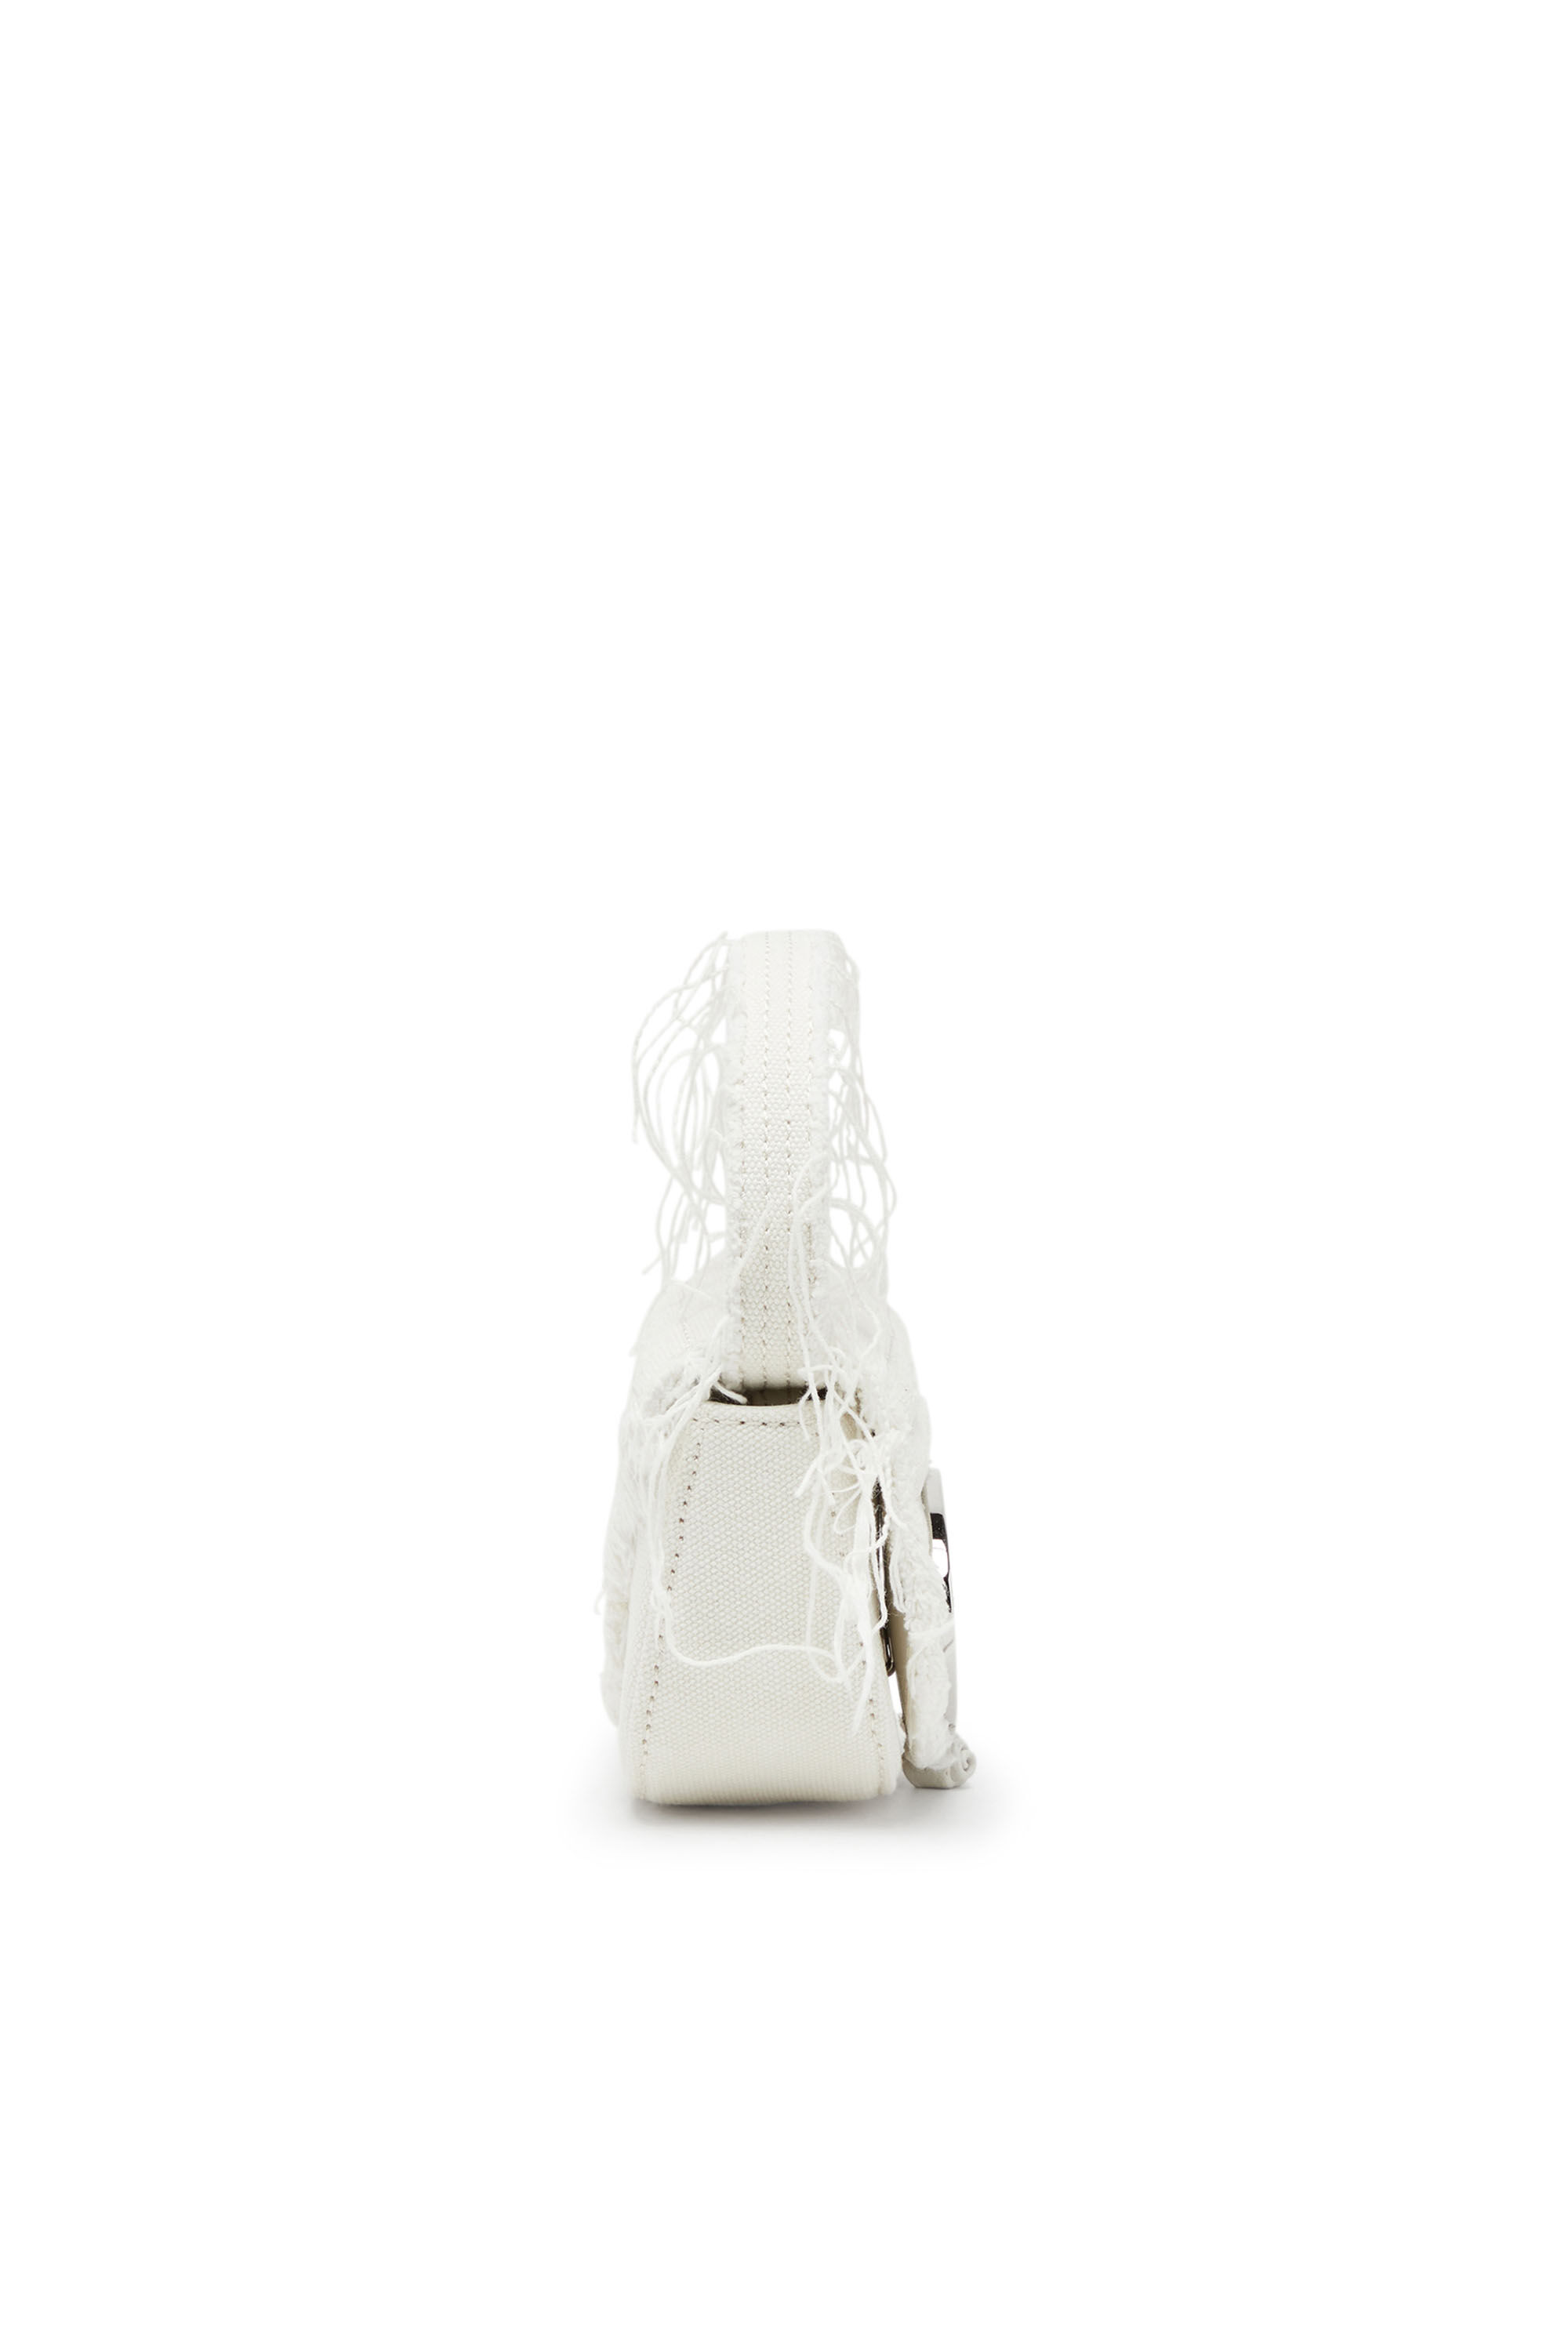 Diesel - 1DR XS, Donna 1DR XS-Iconica mini bag in tela e pelle in Bianco - Image 4